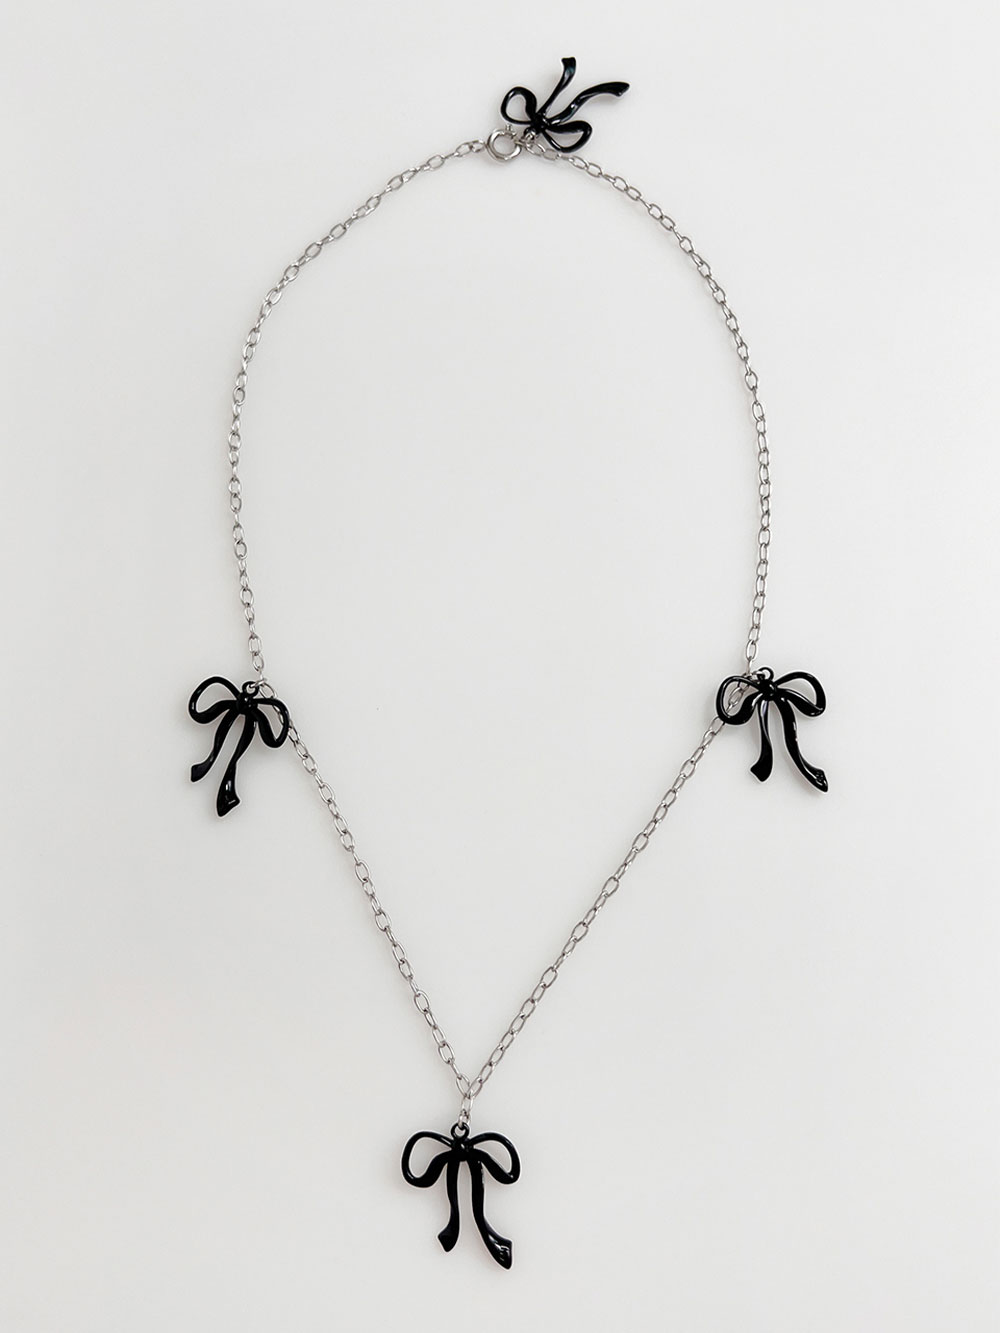 Four Ribbons Necklace / Black